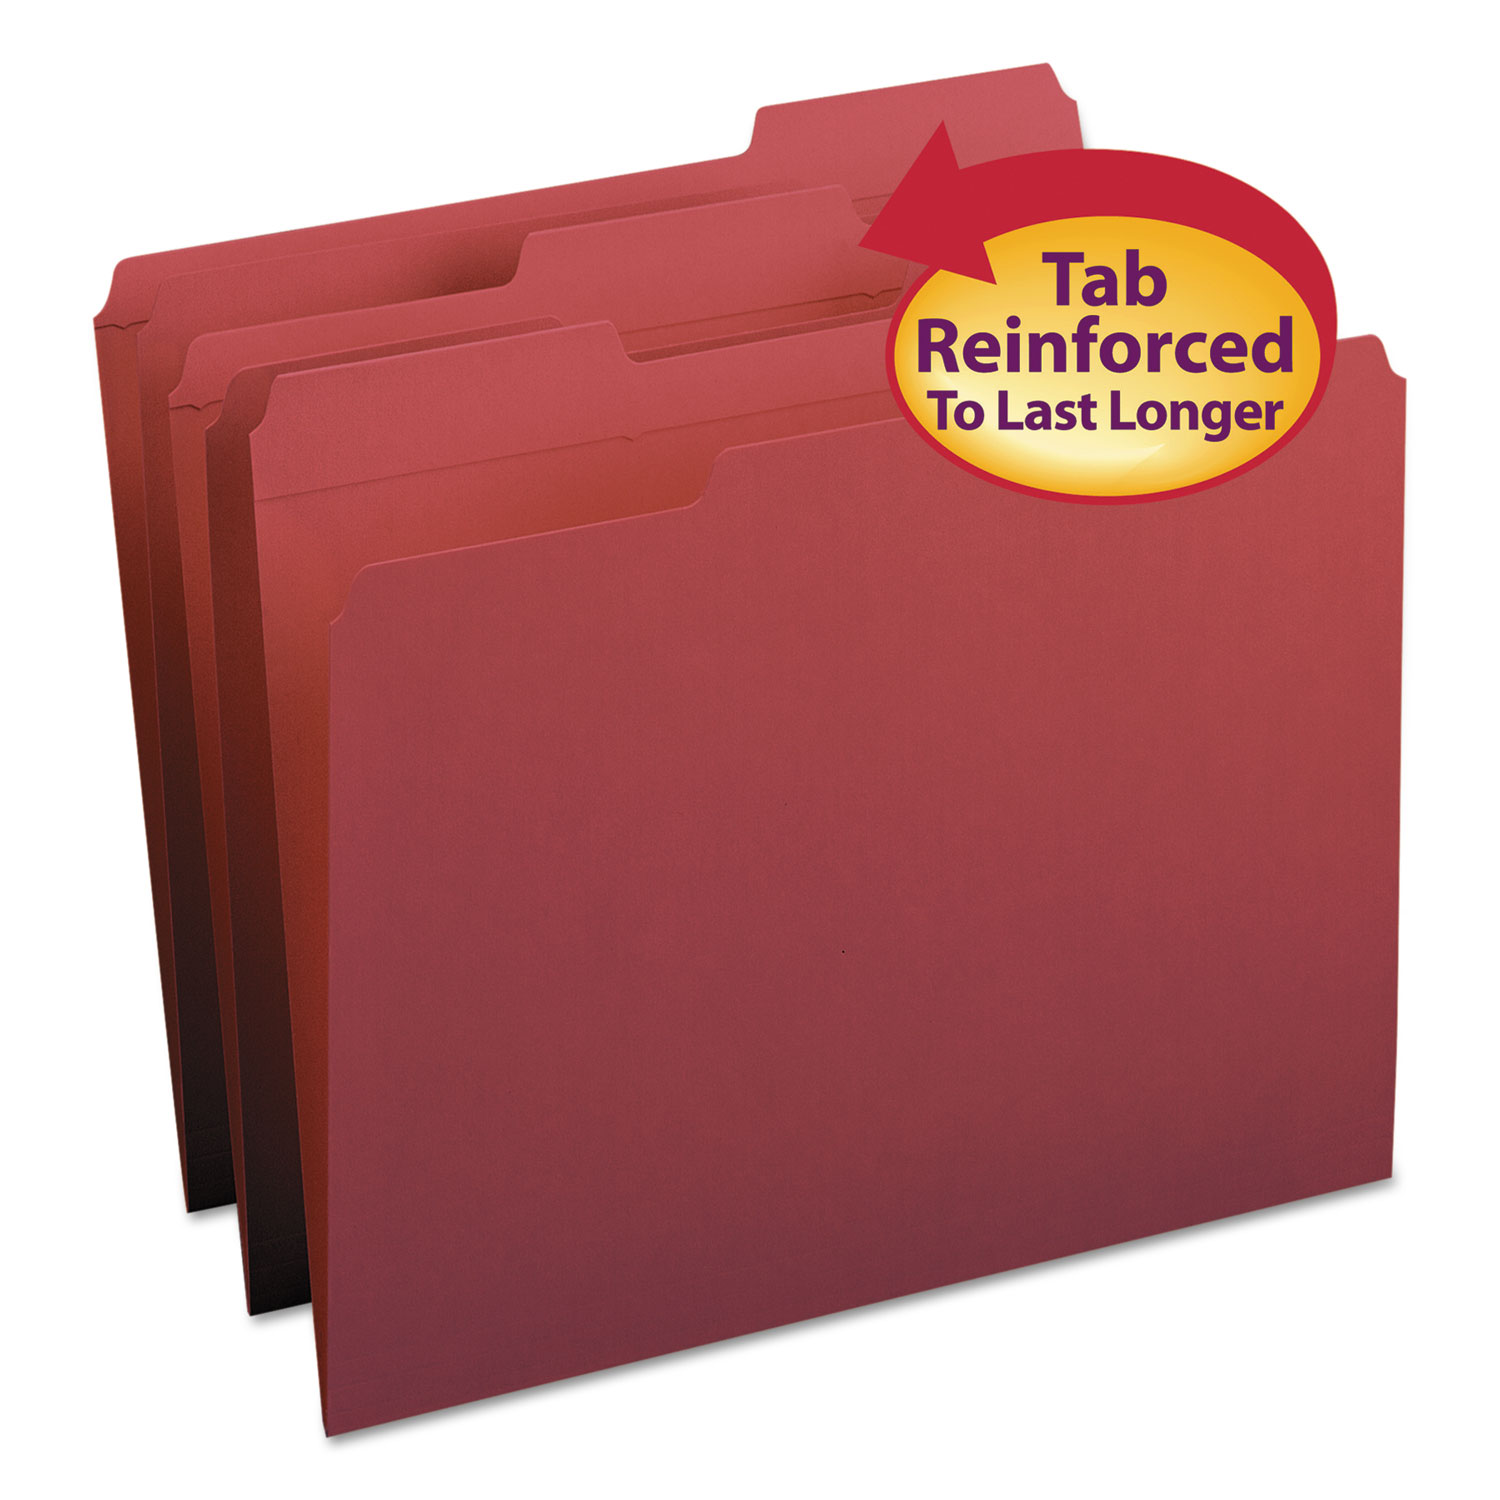  Smead 13084 Reinforced Top Tab Colored File Folders, 1/3-Cut Tabs, Letter Size, Maroon, 100/Box (SMD13084) 